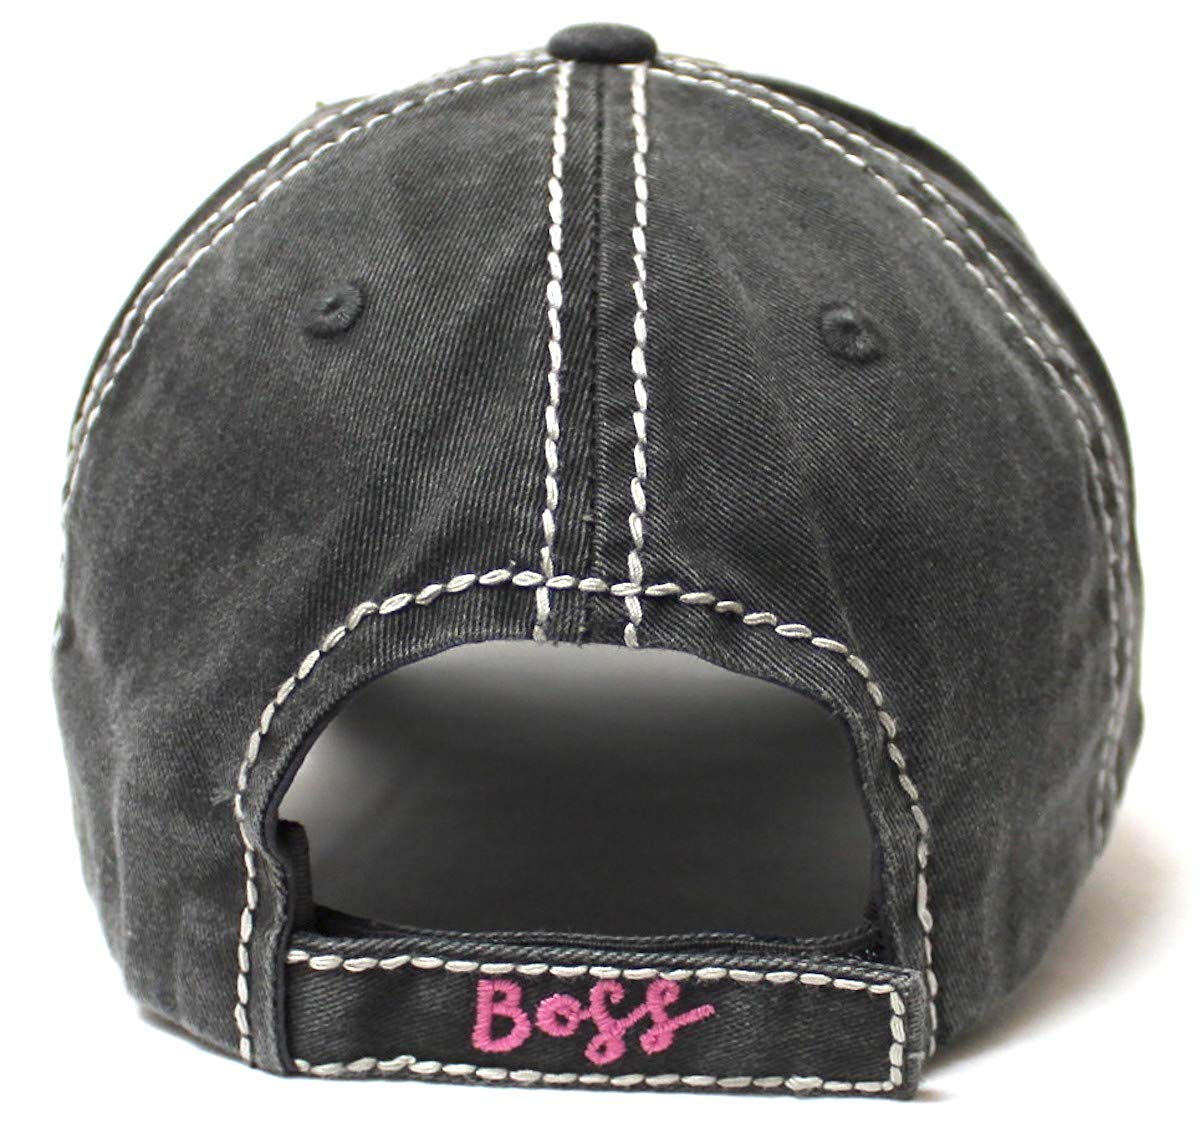 Women's Ballcap Wife, Mom, Boss Patch Embroidery Vintage Hat, Graphite Black - Caps 'N Vintage 